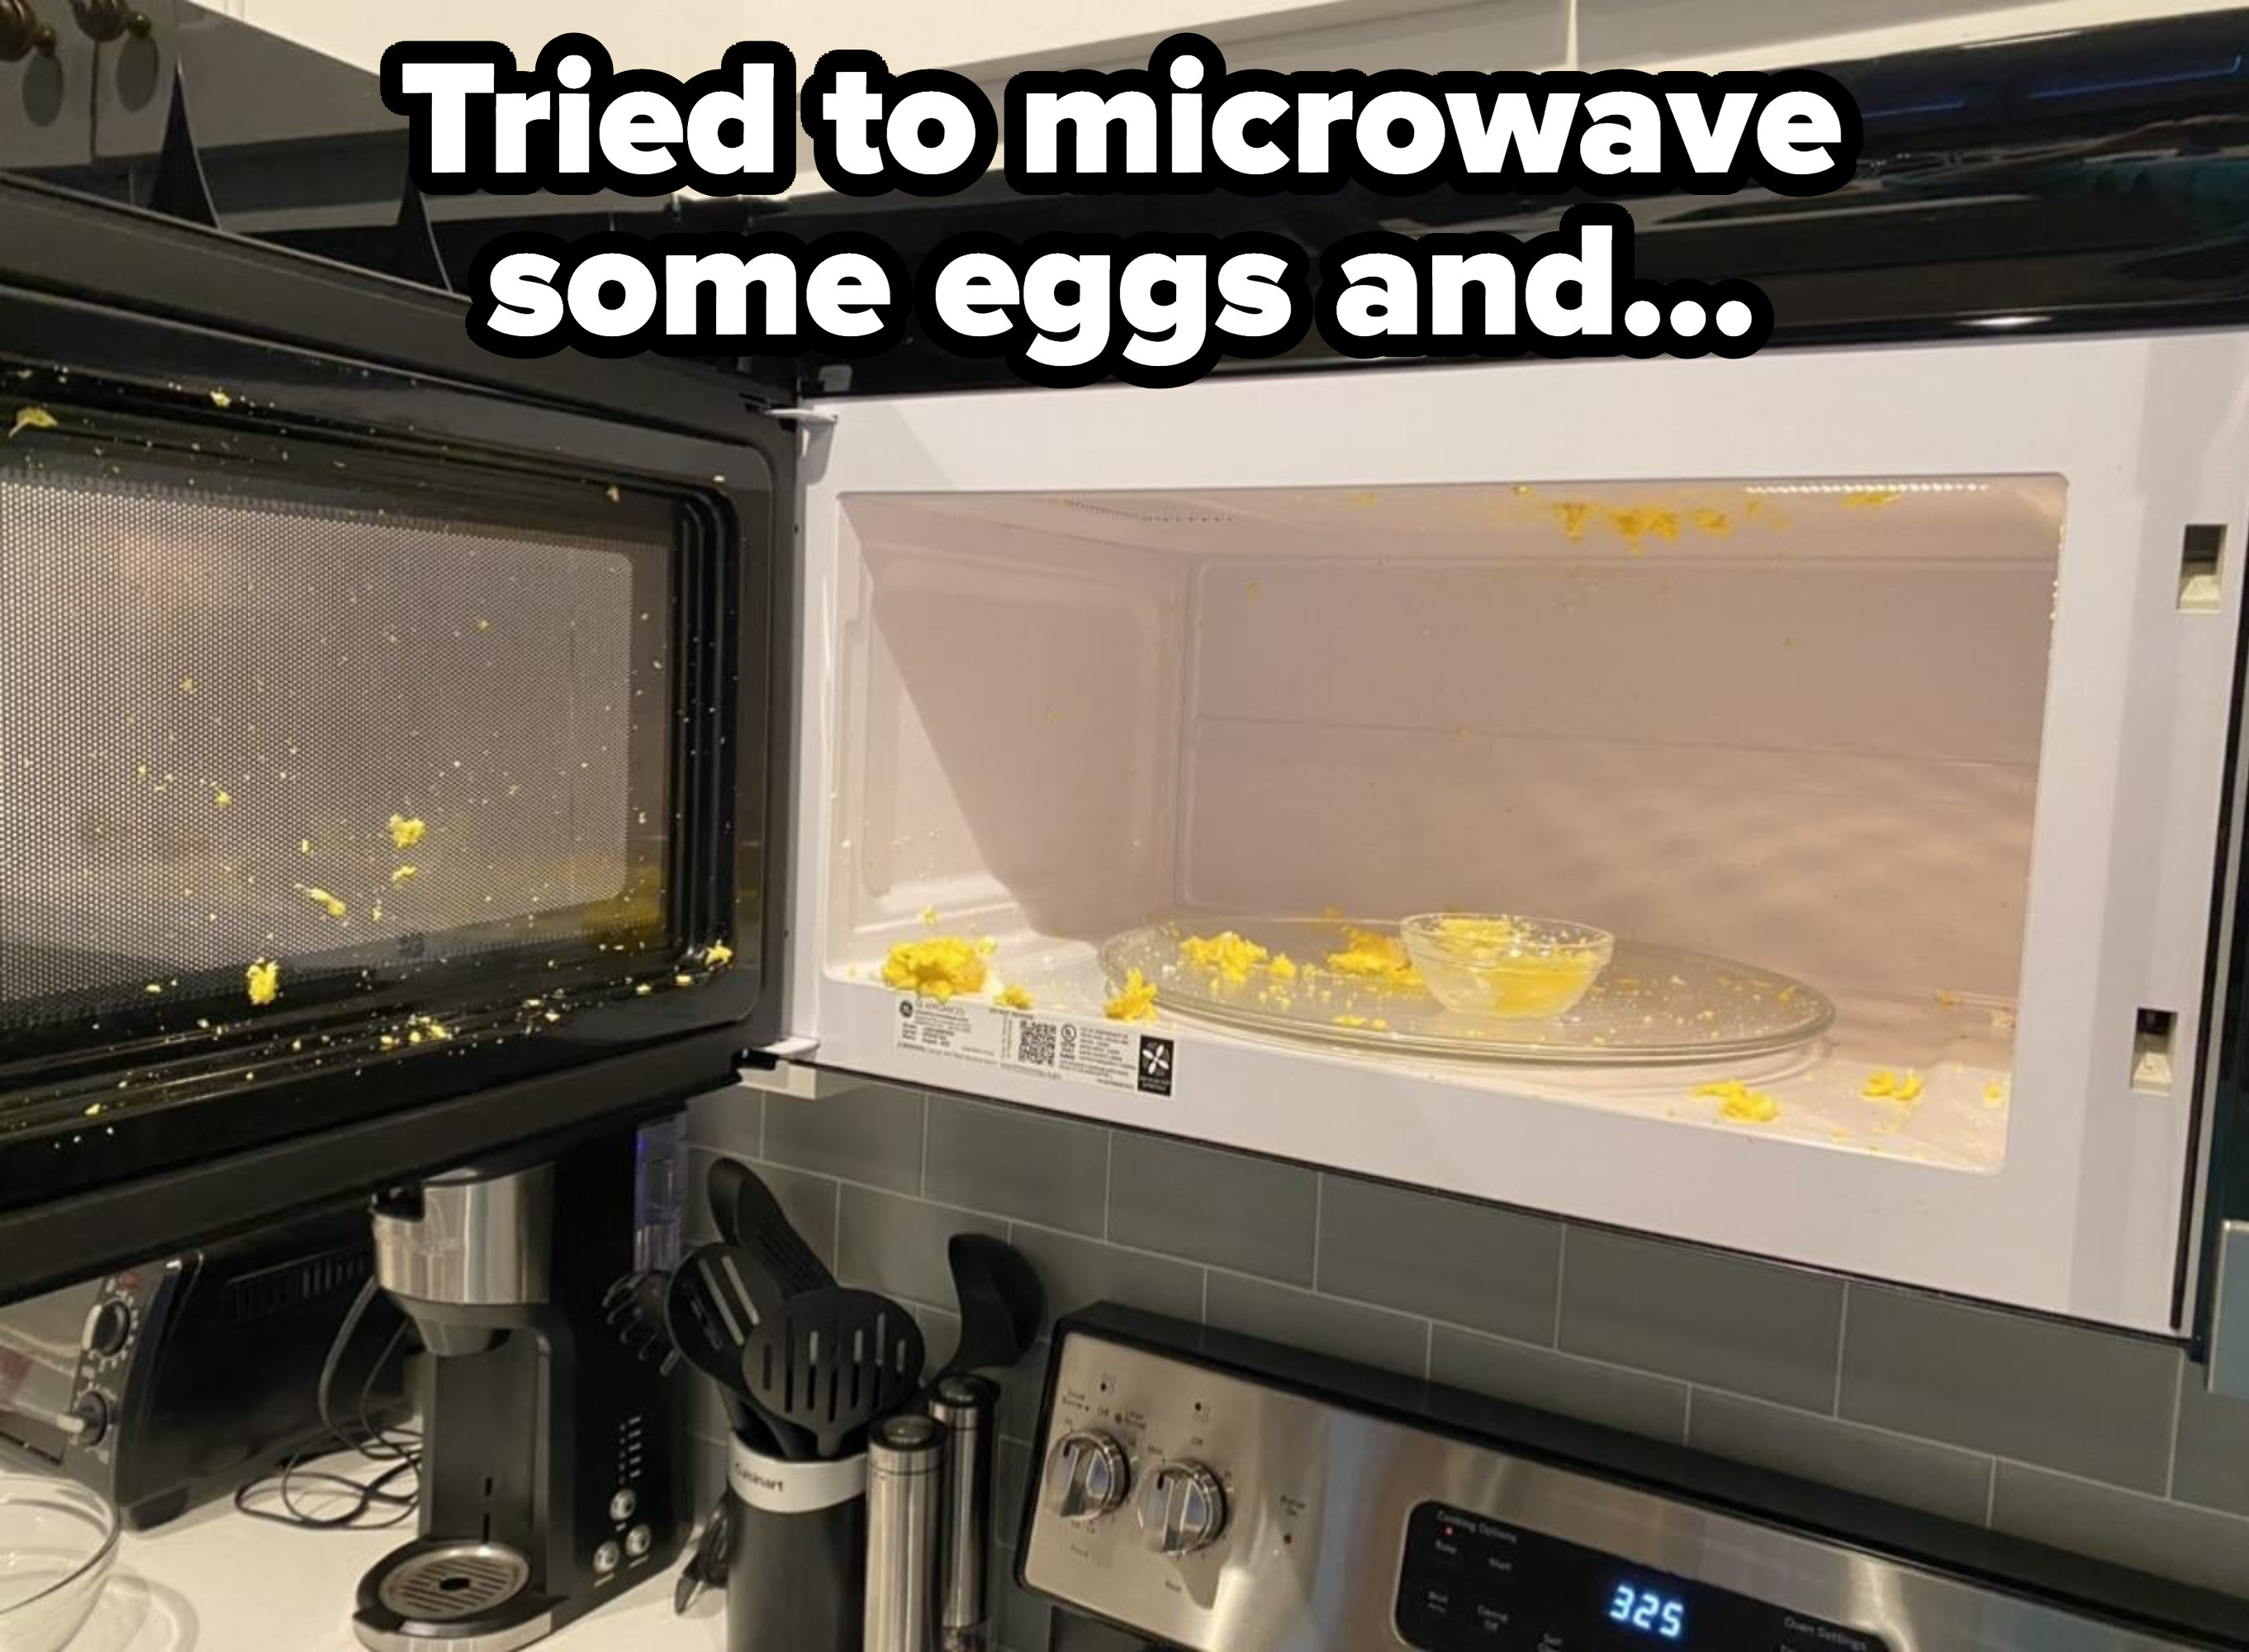 eggs exploded in a microwave